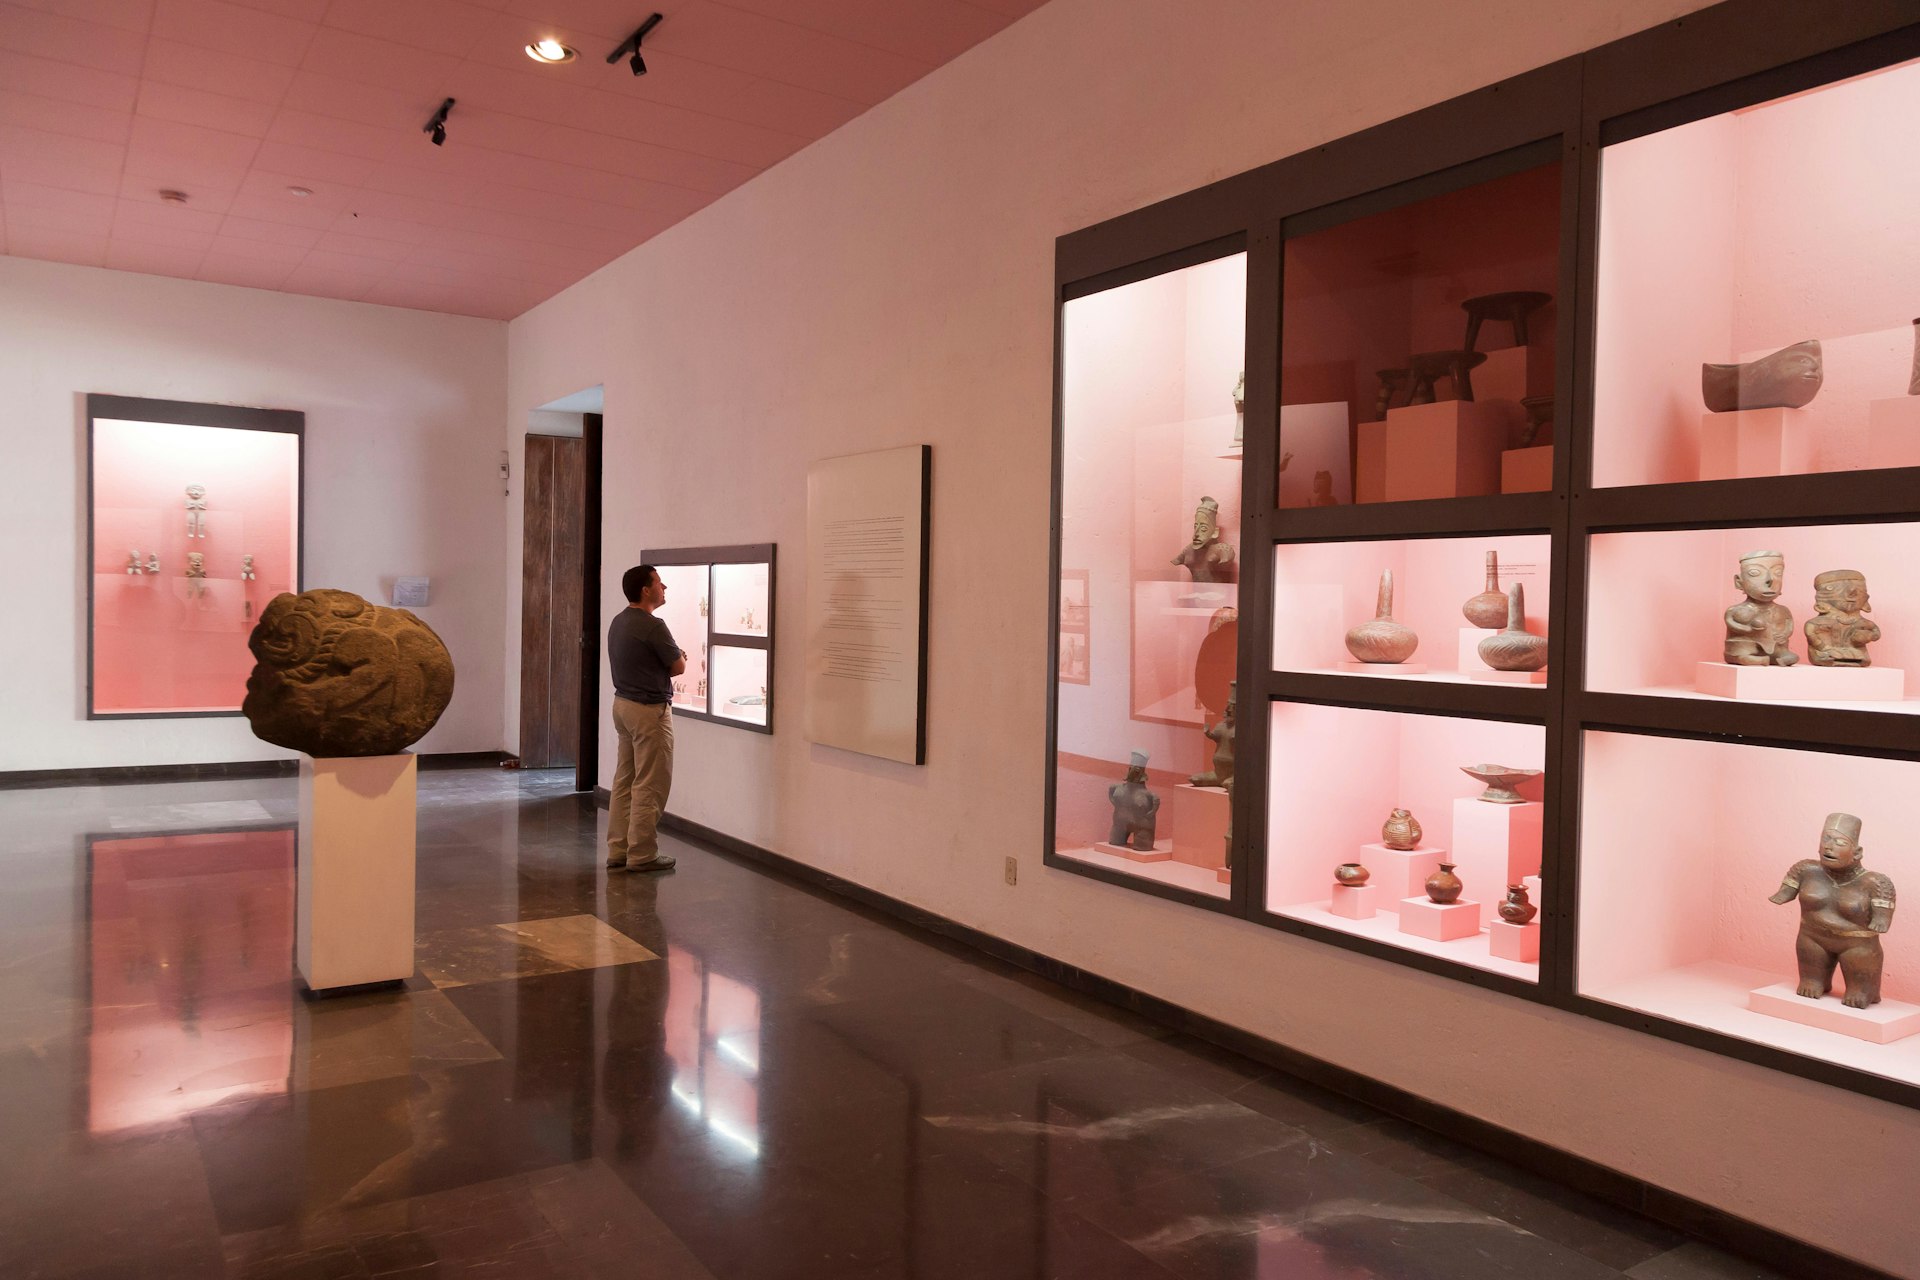 Artifacts on display at the Rufino Tamayo Museum of Pre-Hispanic Art in the Centro Historico